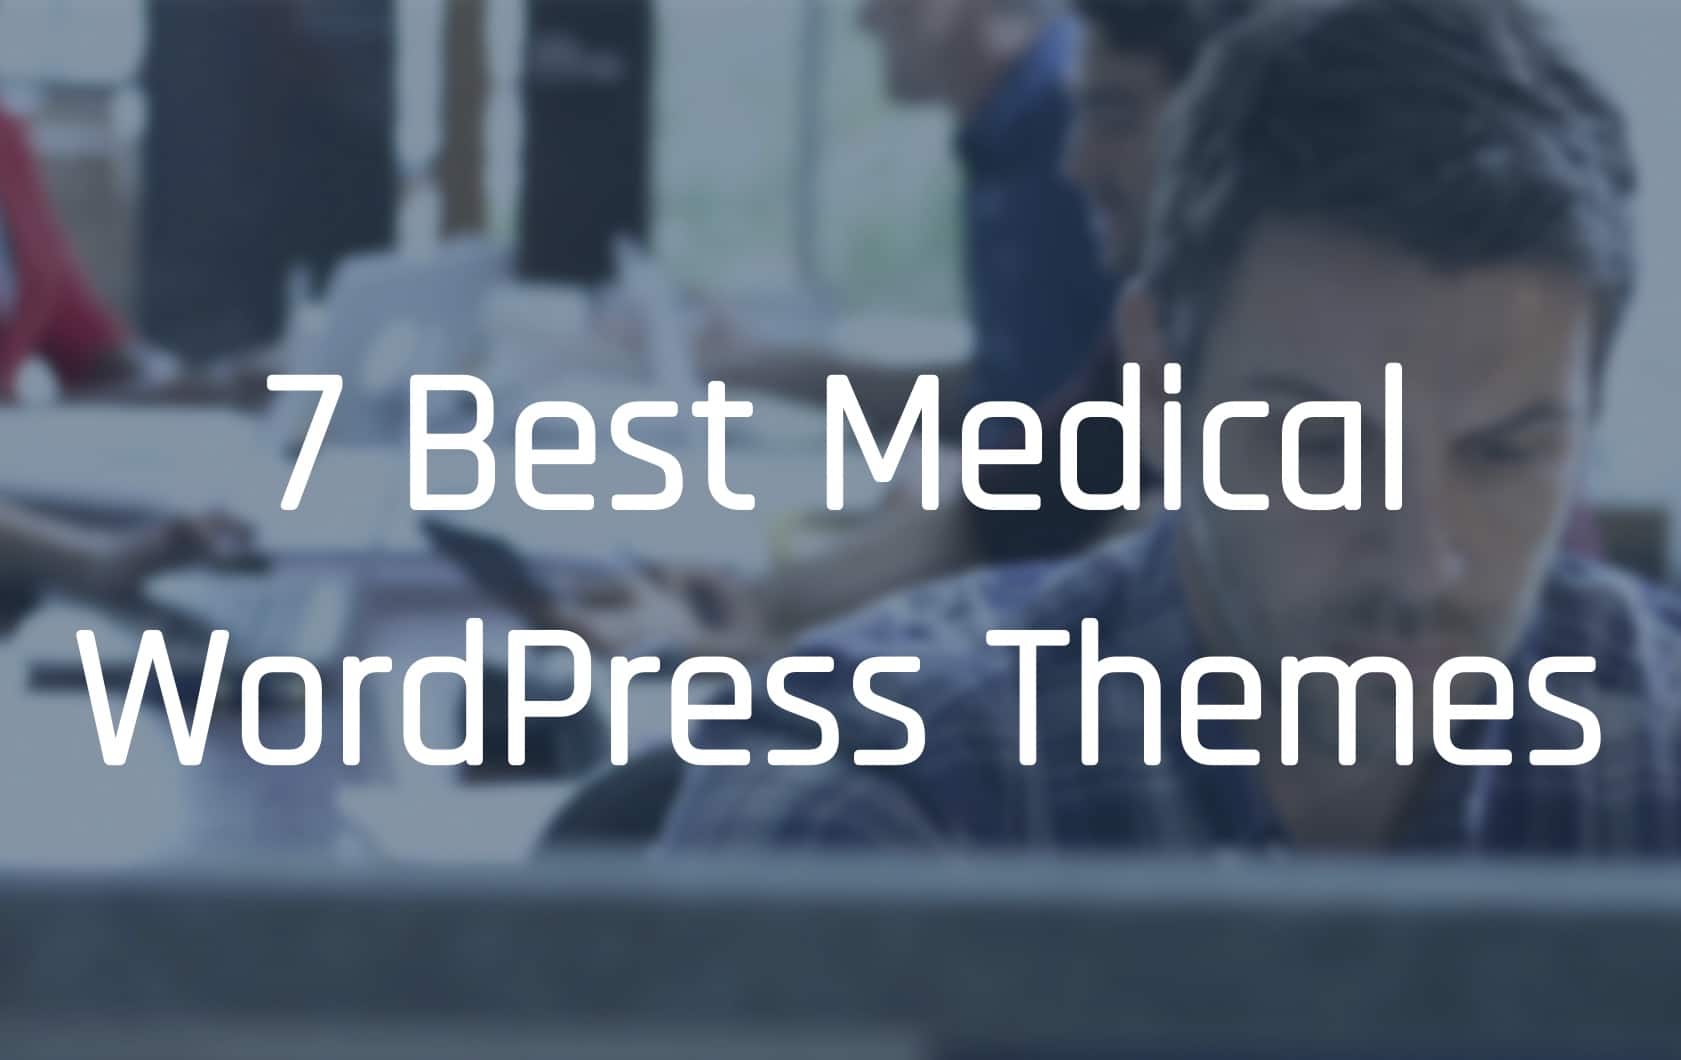 A person is smiling while looking at a screenshot of one of the seven best medical WordPress themes.